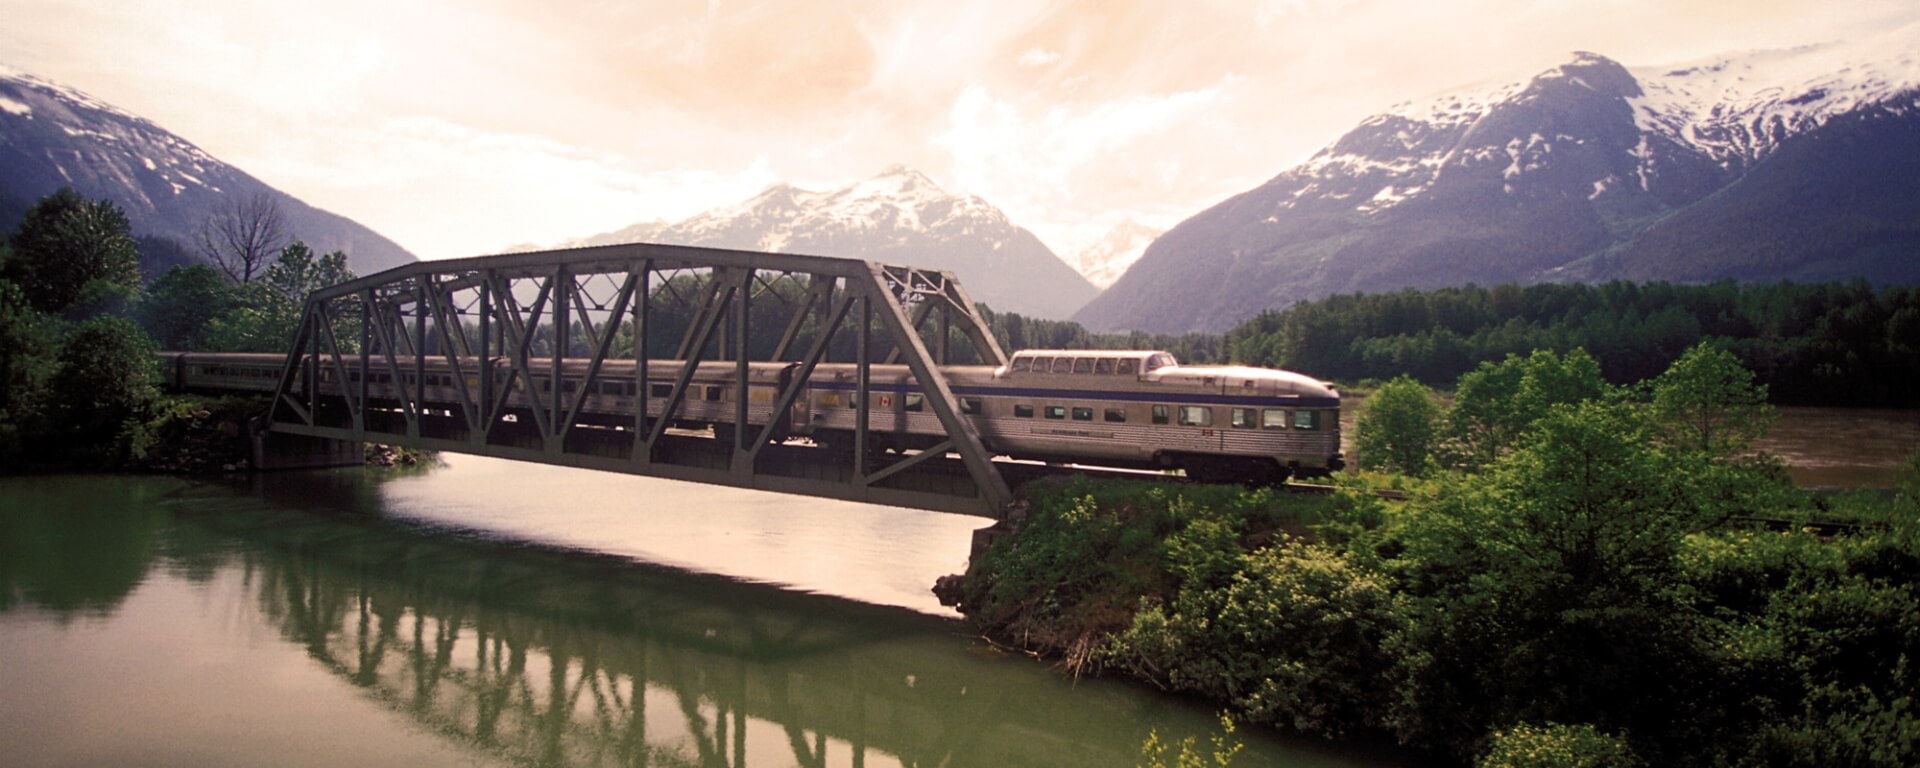 Canadian Pacific: Rockies to Vancouver by Rail